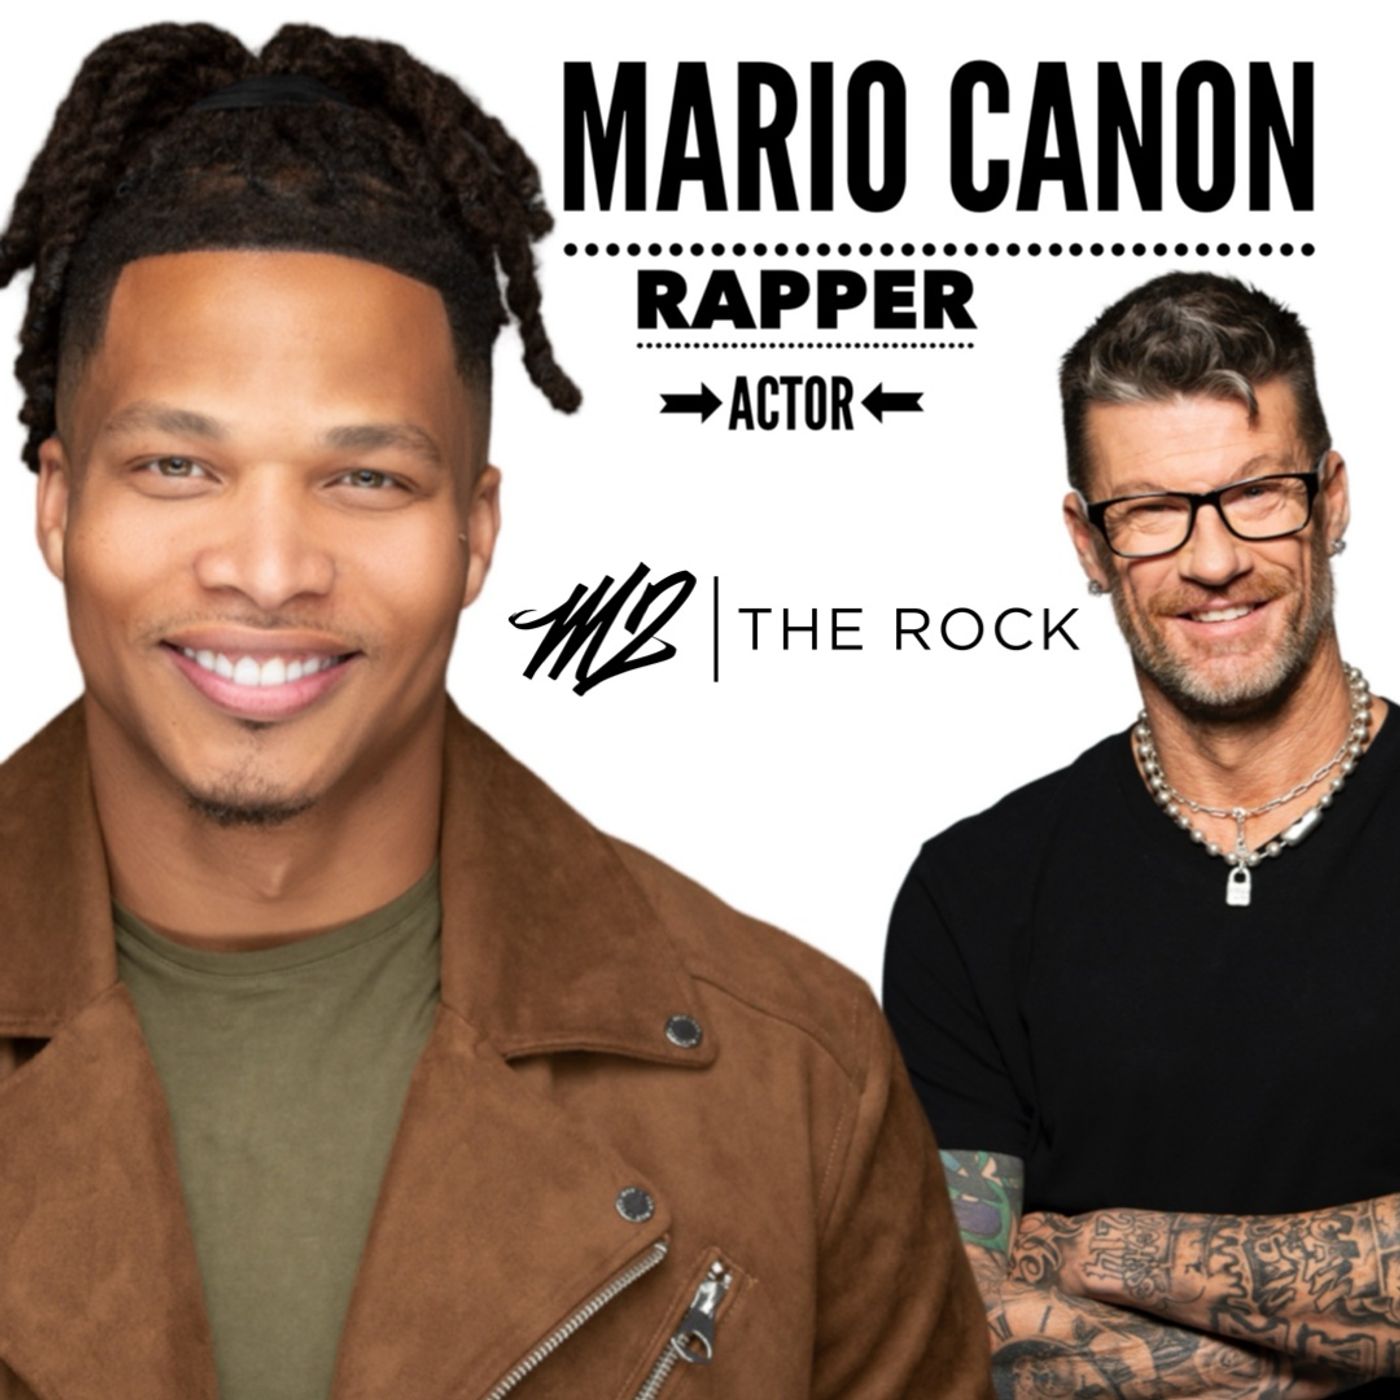 MARIO CANON - EMPIRE SHOW ACTOR || RAPPER || Sits Down with M2 THE ROCK